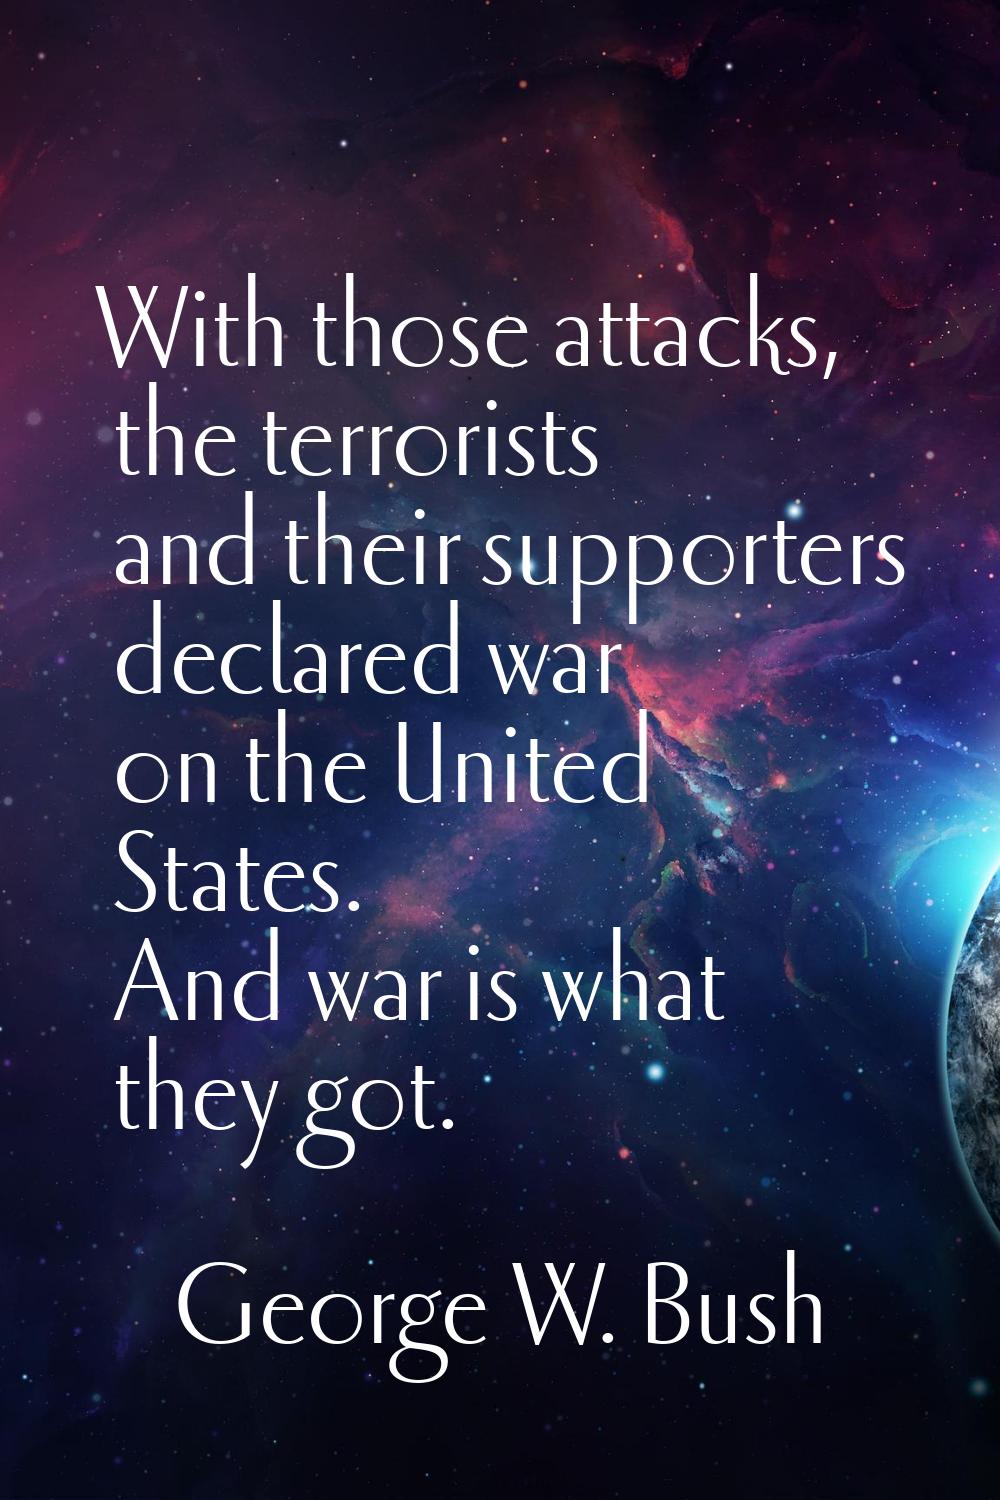 With those attacks, the terrorists and their supporters declared war on the United States. And war 